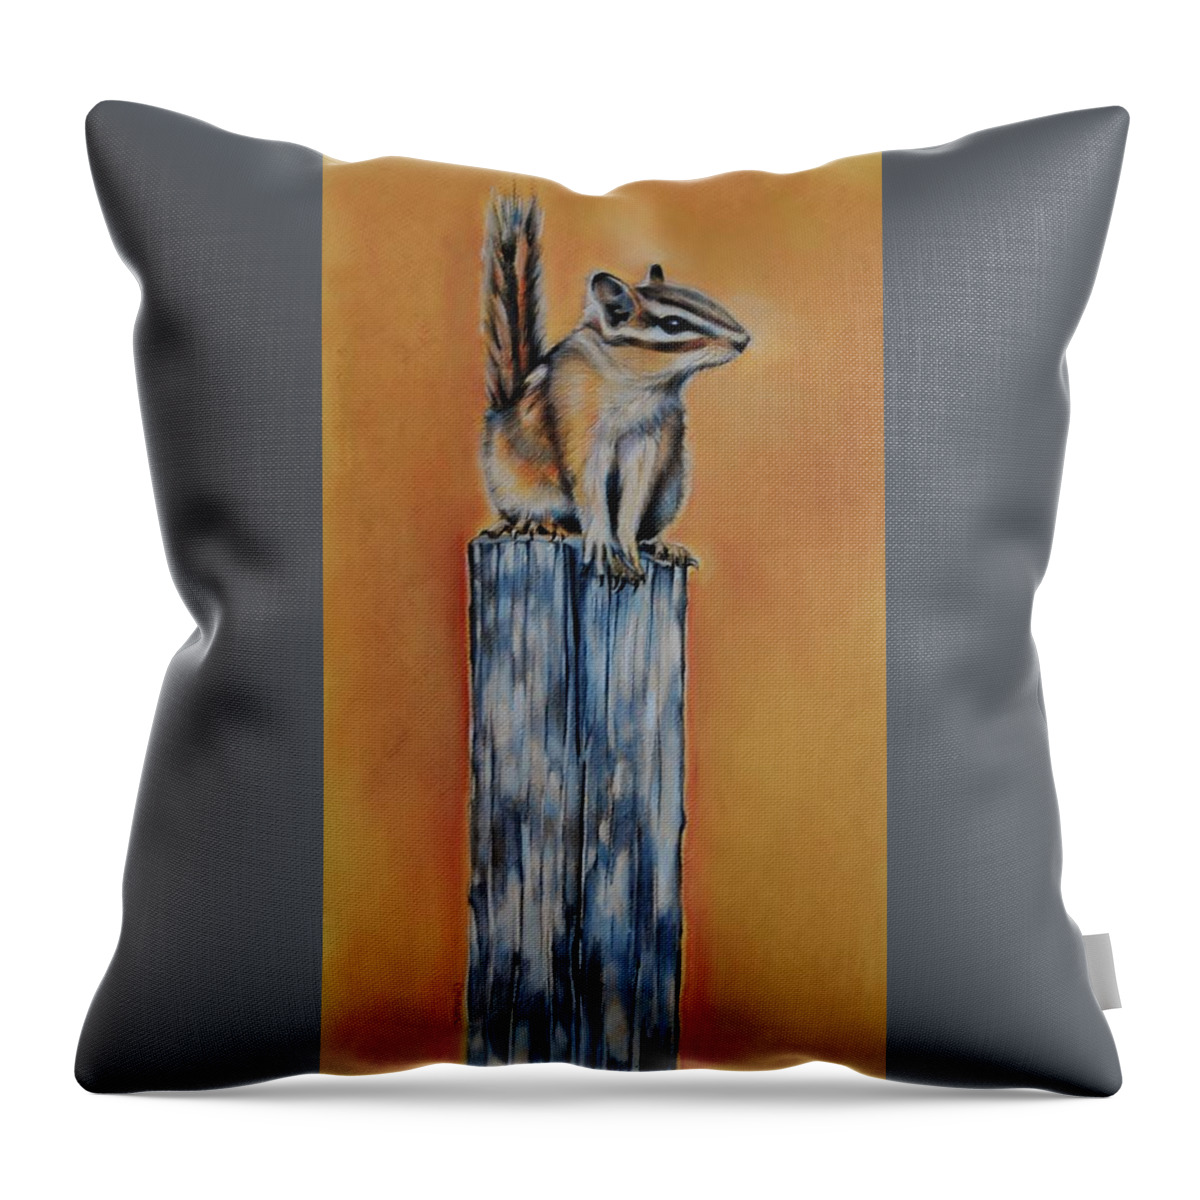 Chipmunk Throw Pillow featuring the drawing On the Fence by Jean Cormier